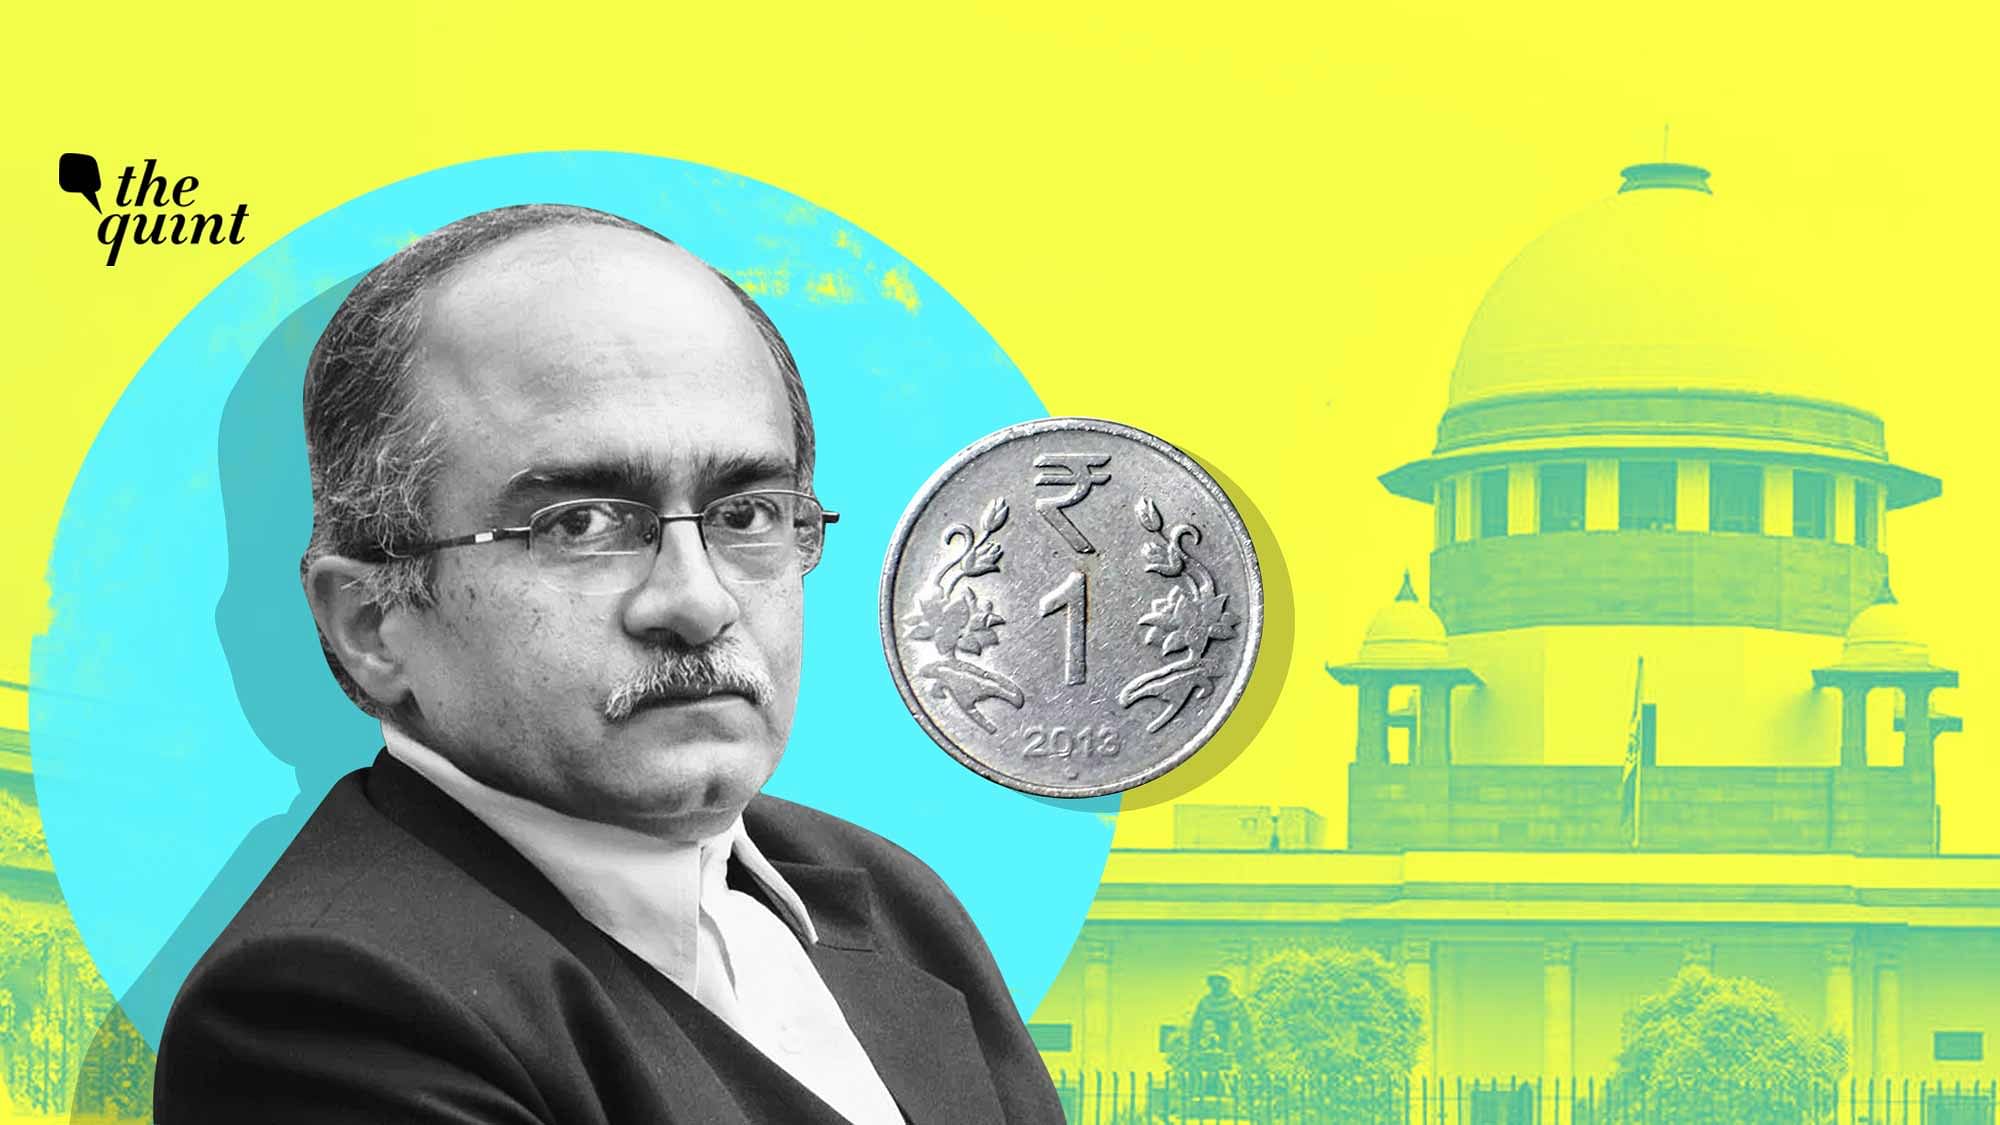 On Monday, 31 August, the Supreme Court <a href="https://www.thequint.com/news/law/supreme-court-announces-sentence-prashant-bhushan-contempt-case-tweets-verdict-review">ordered activist and lawyer</a> Prashant Bhushan to pay a Re 1 fine as punishment for contempt of court by 15 September.